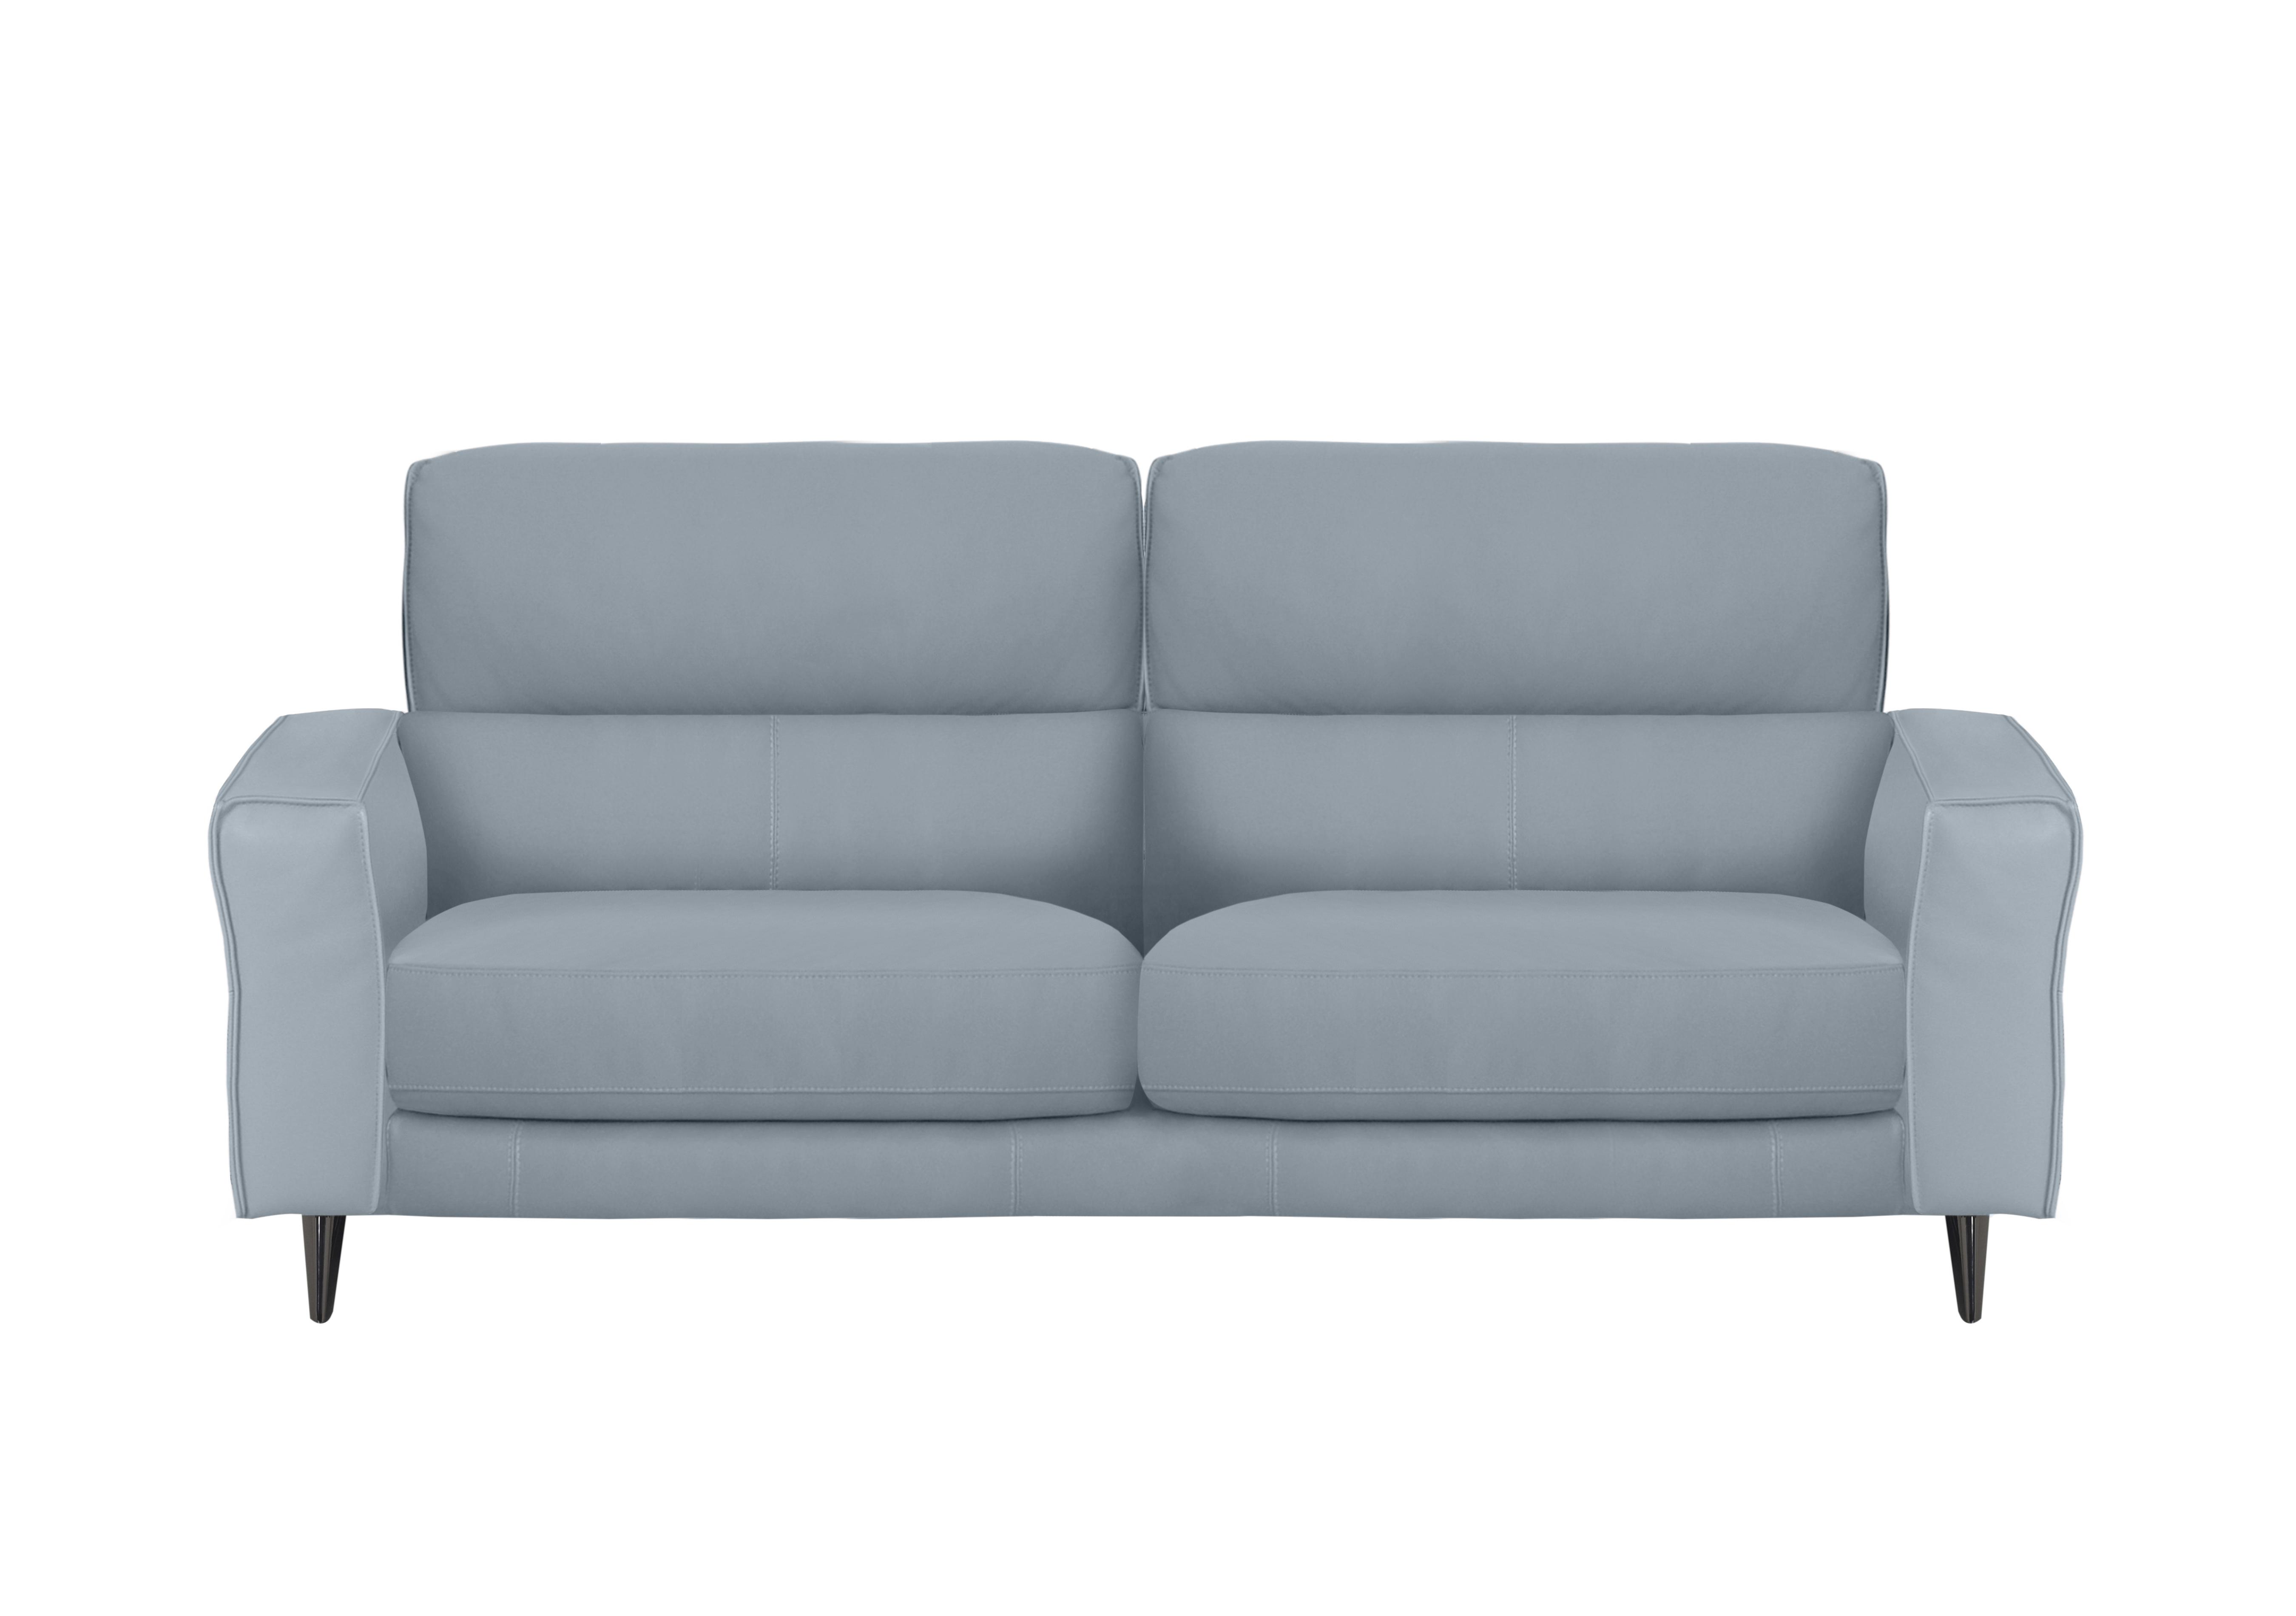 Axel 3 Seater Leather Sofa in Nc-026e Pearl Blue on Furniture Village